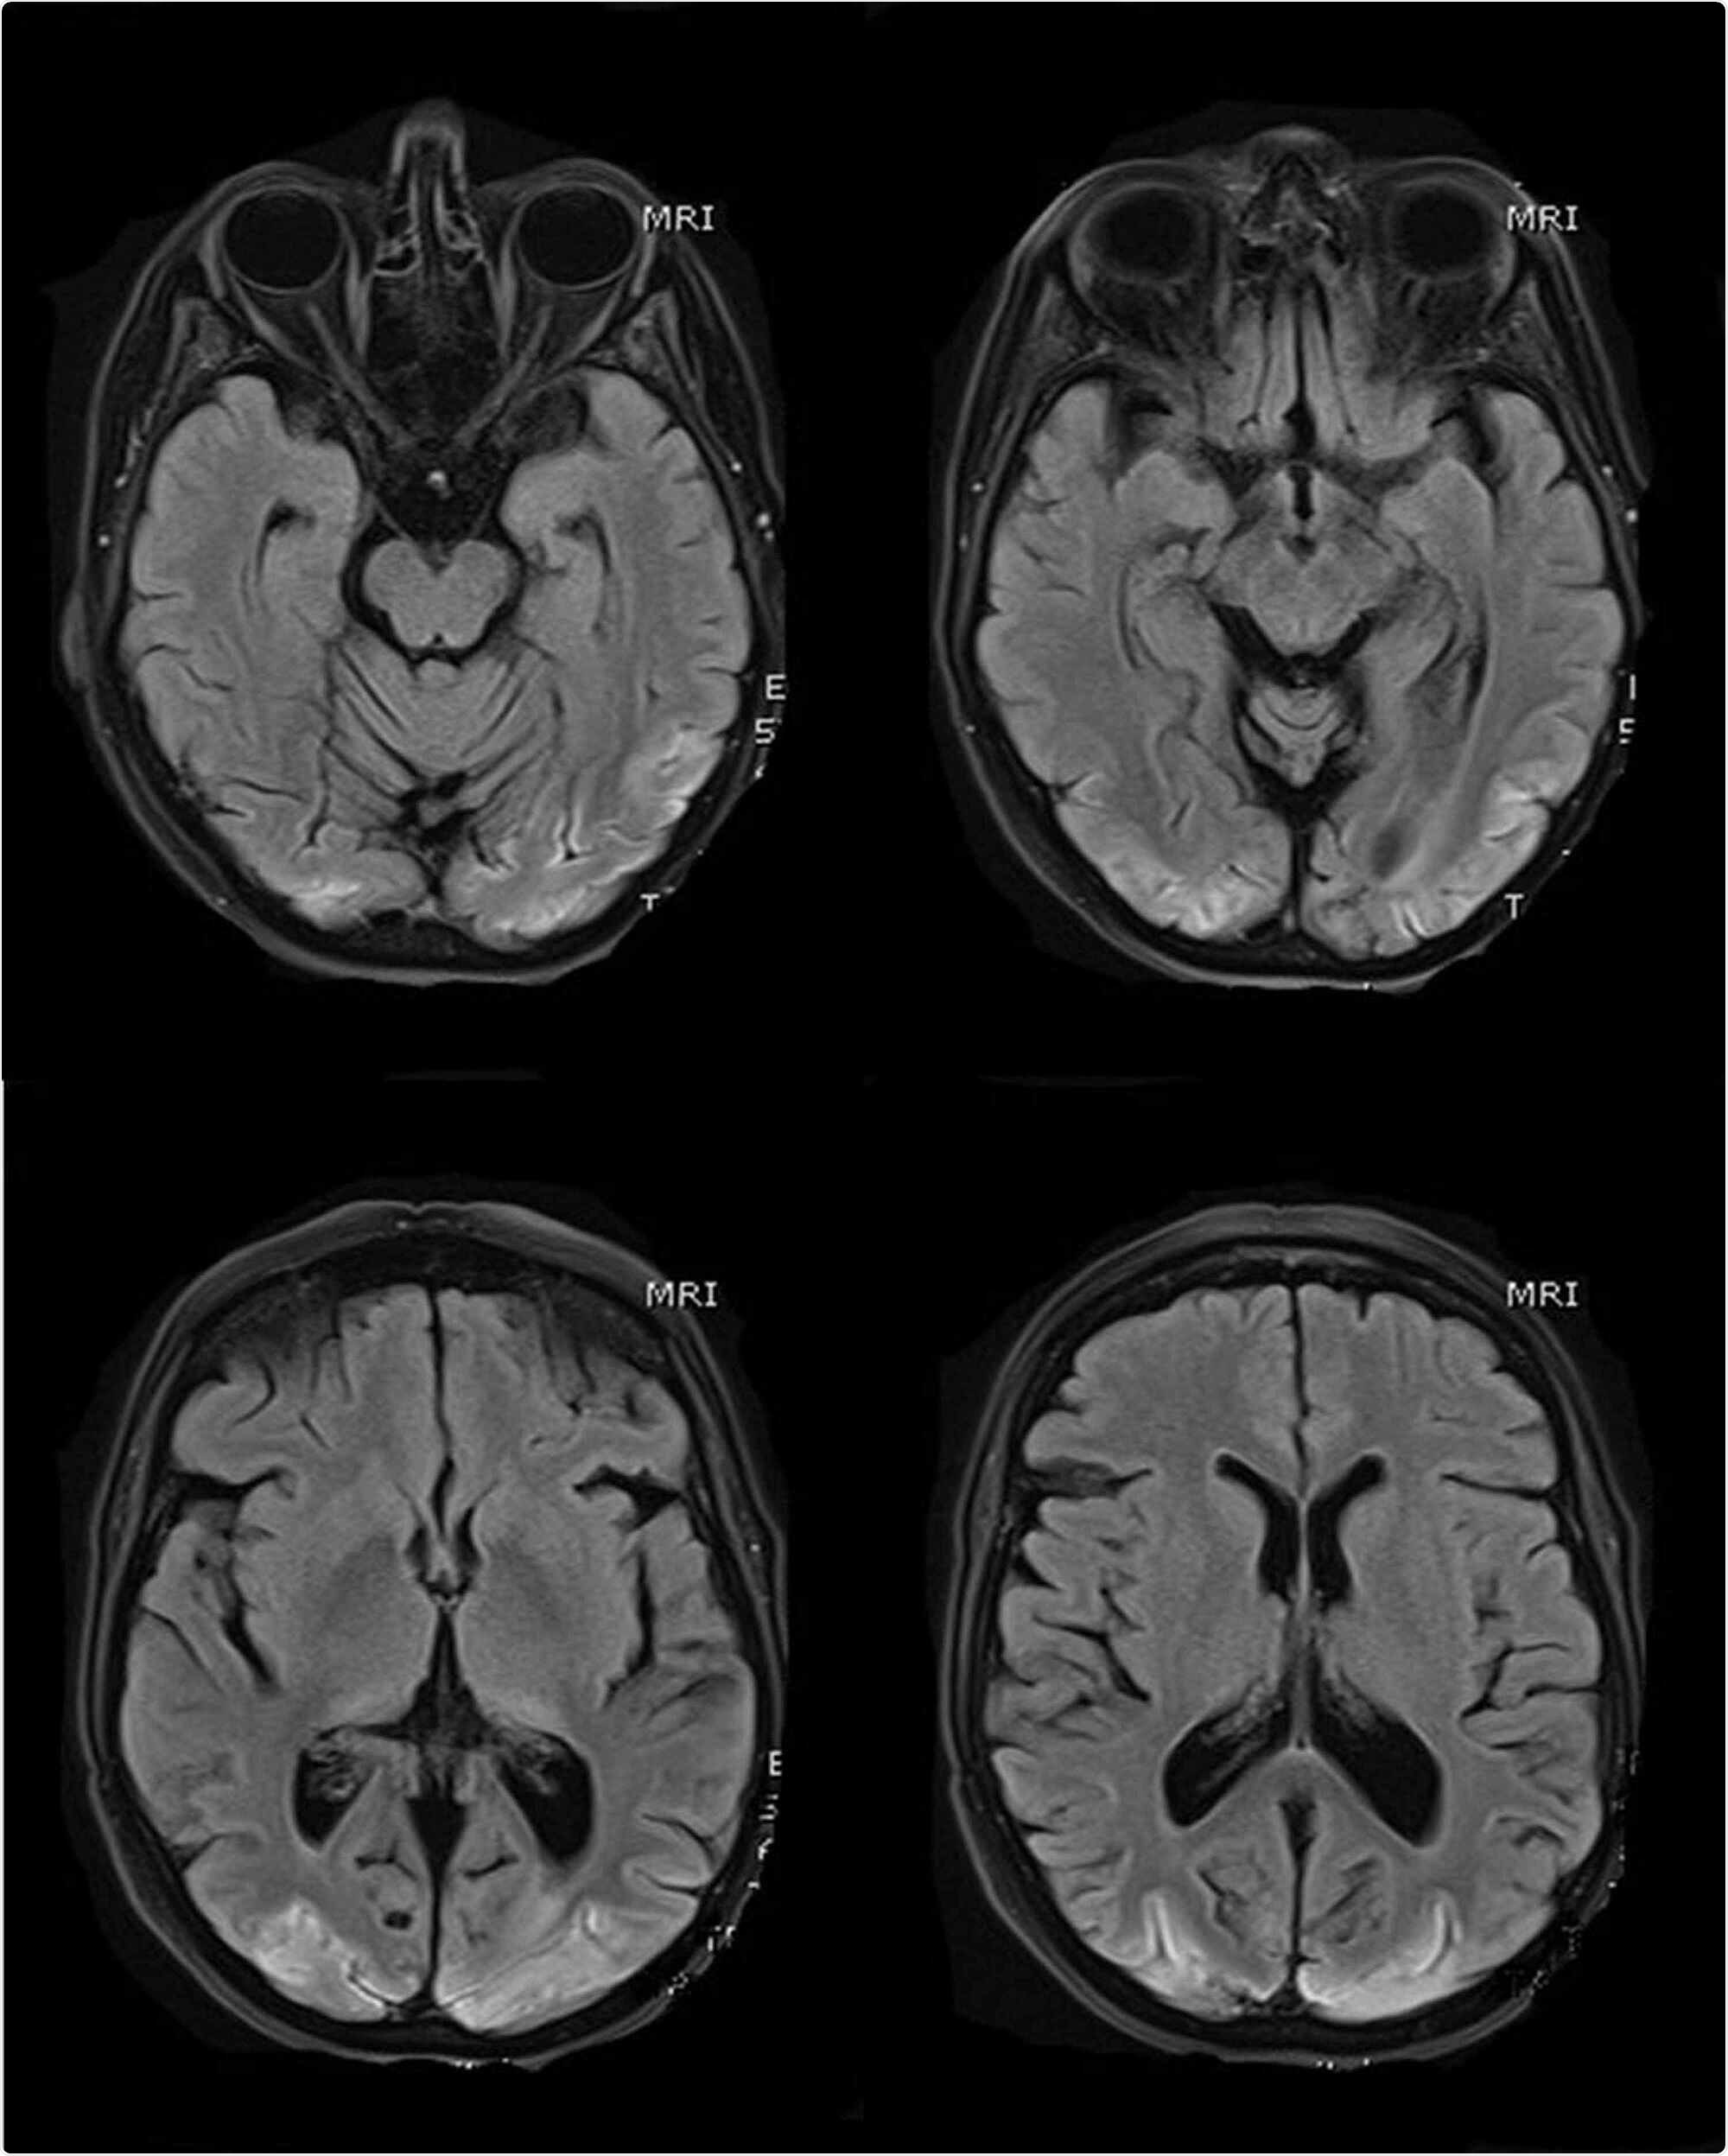 MR scans of the brain (selected T1 sequences) show bilateral symmetrical hyper-intensity involving the bilateral occipital lobe cortex; the changes are consistent with cortical pseudo-laminar necrosis as a complication of posterior reversible encephalopathy syndrome (PRES)